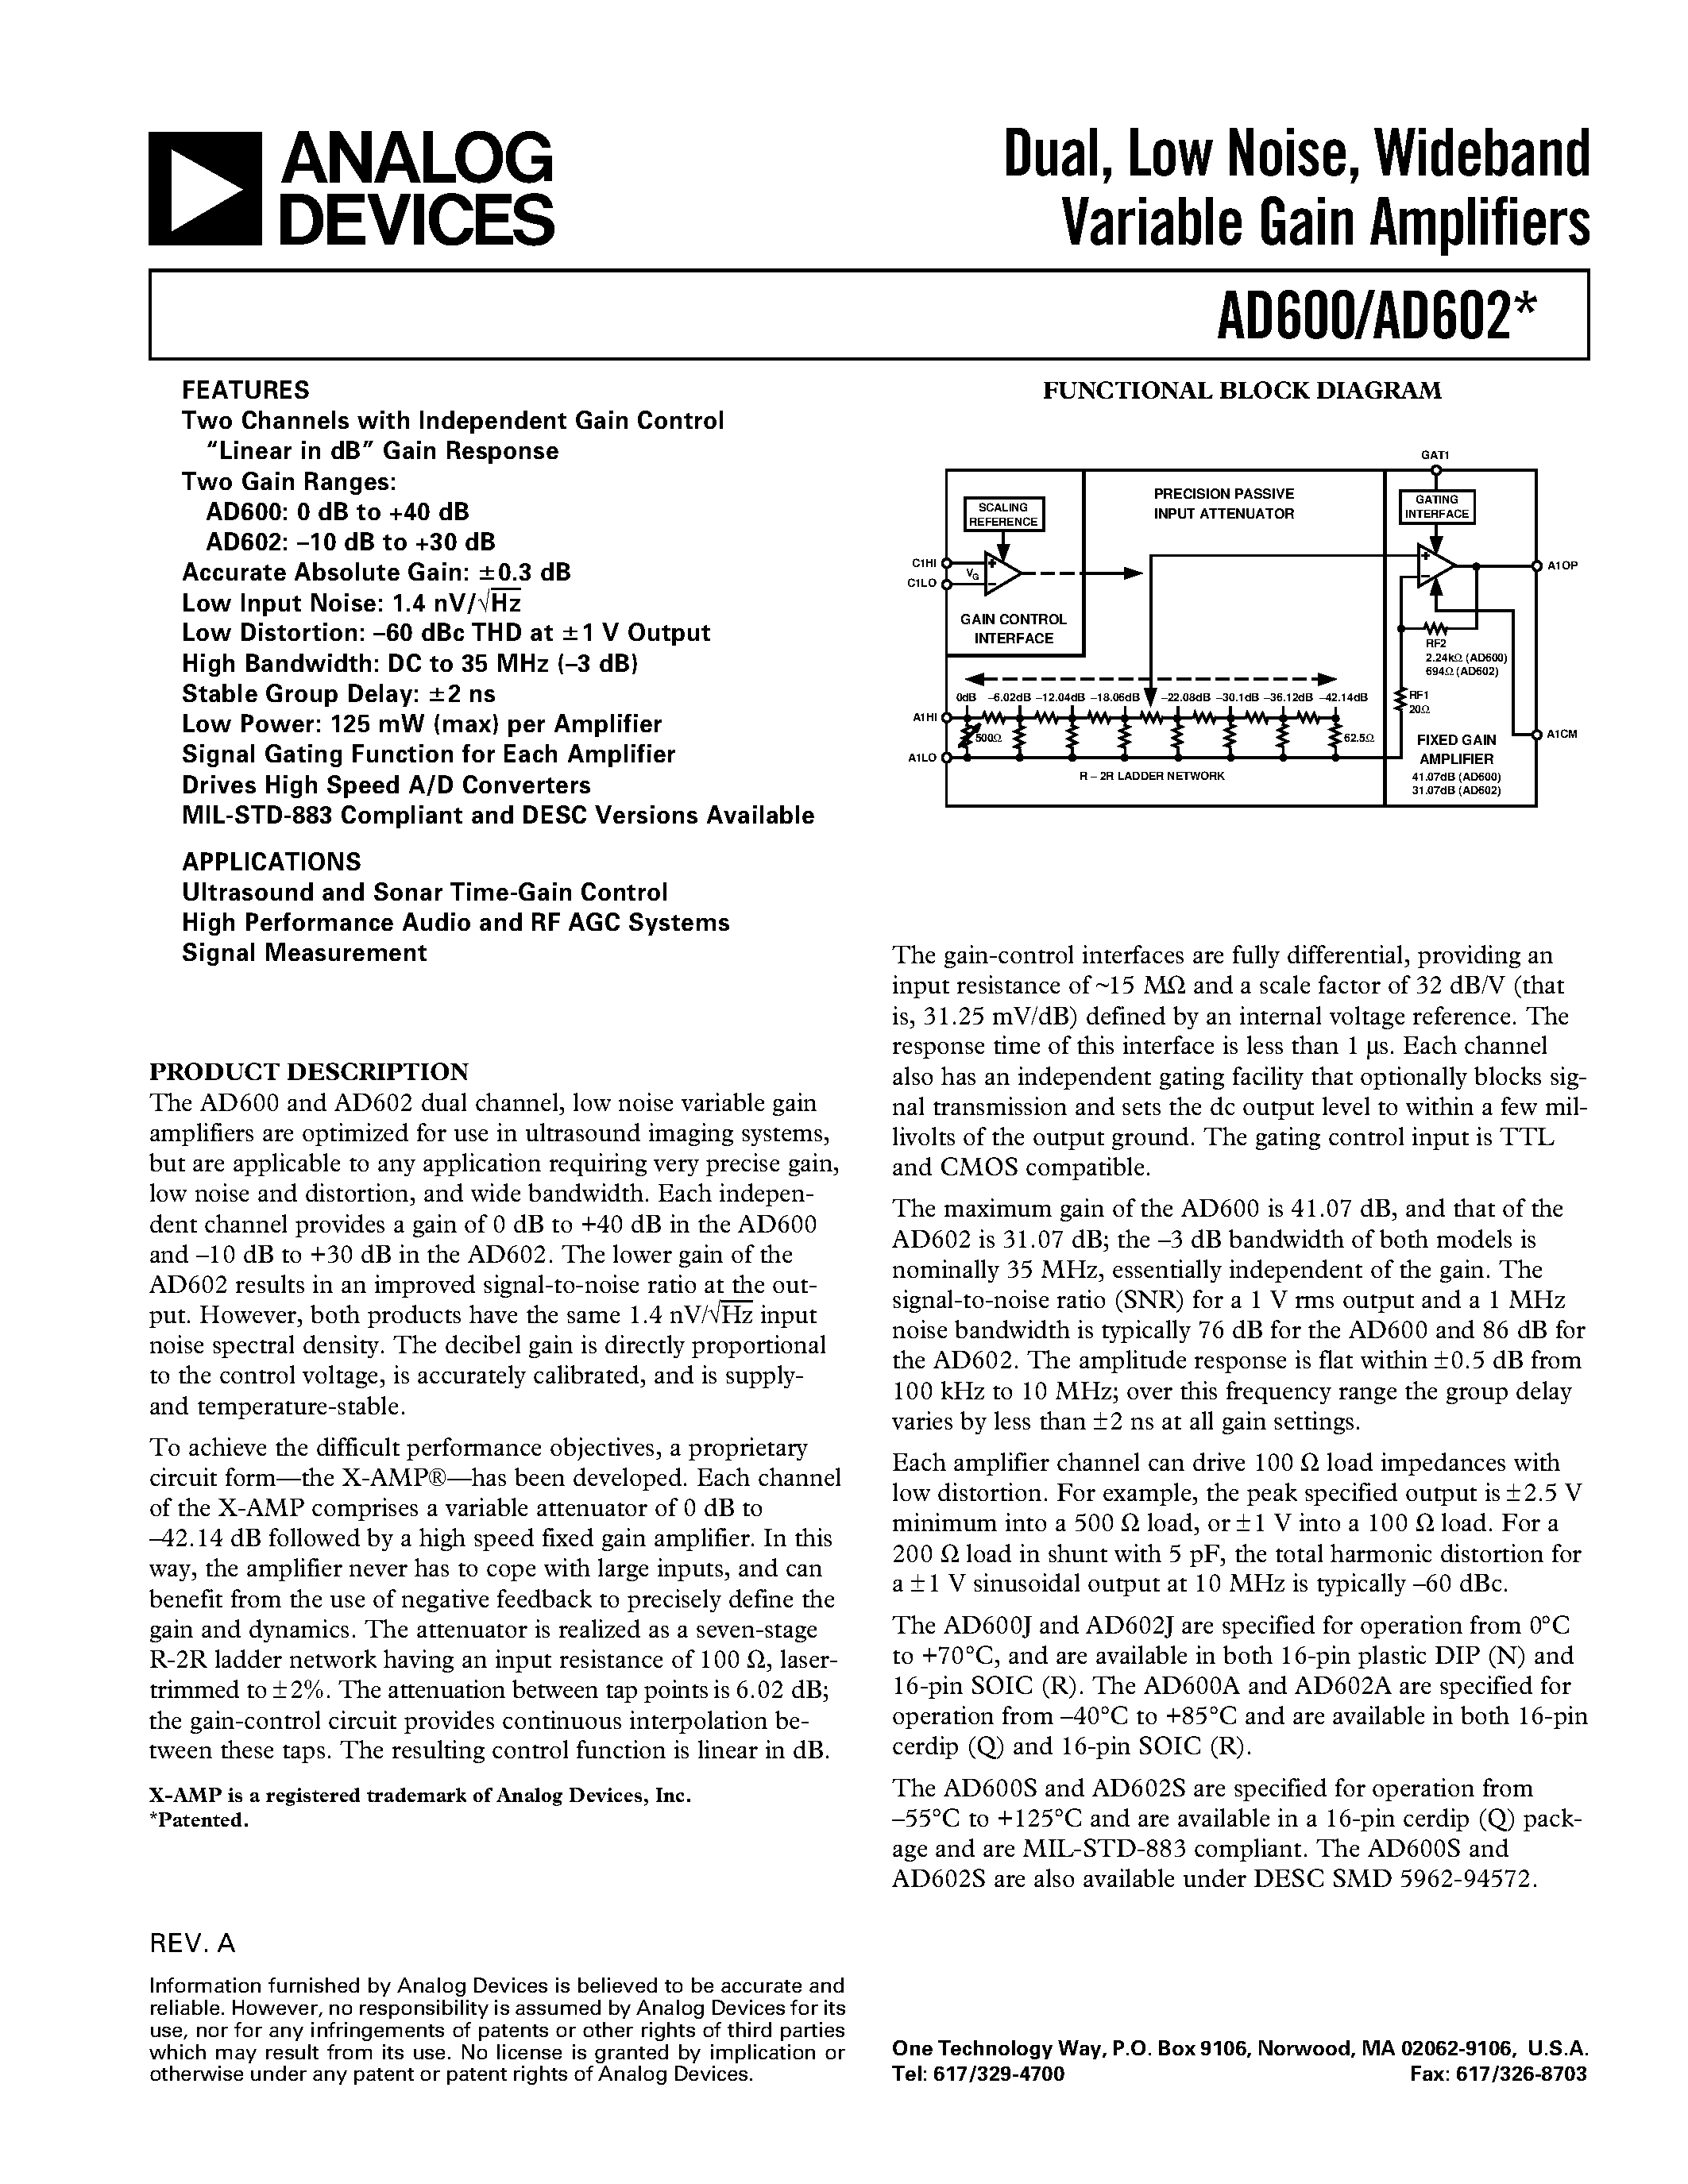 Datasheet AD602AR - Dual/ Low Noise/ Wideband Variable Gain Amplifiers page 1